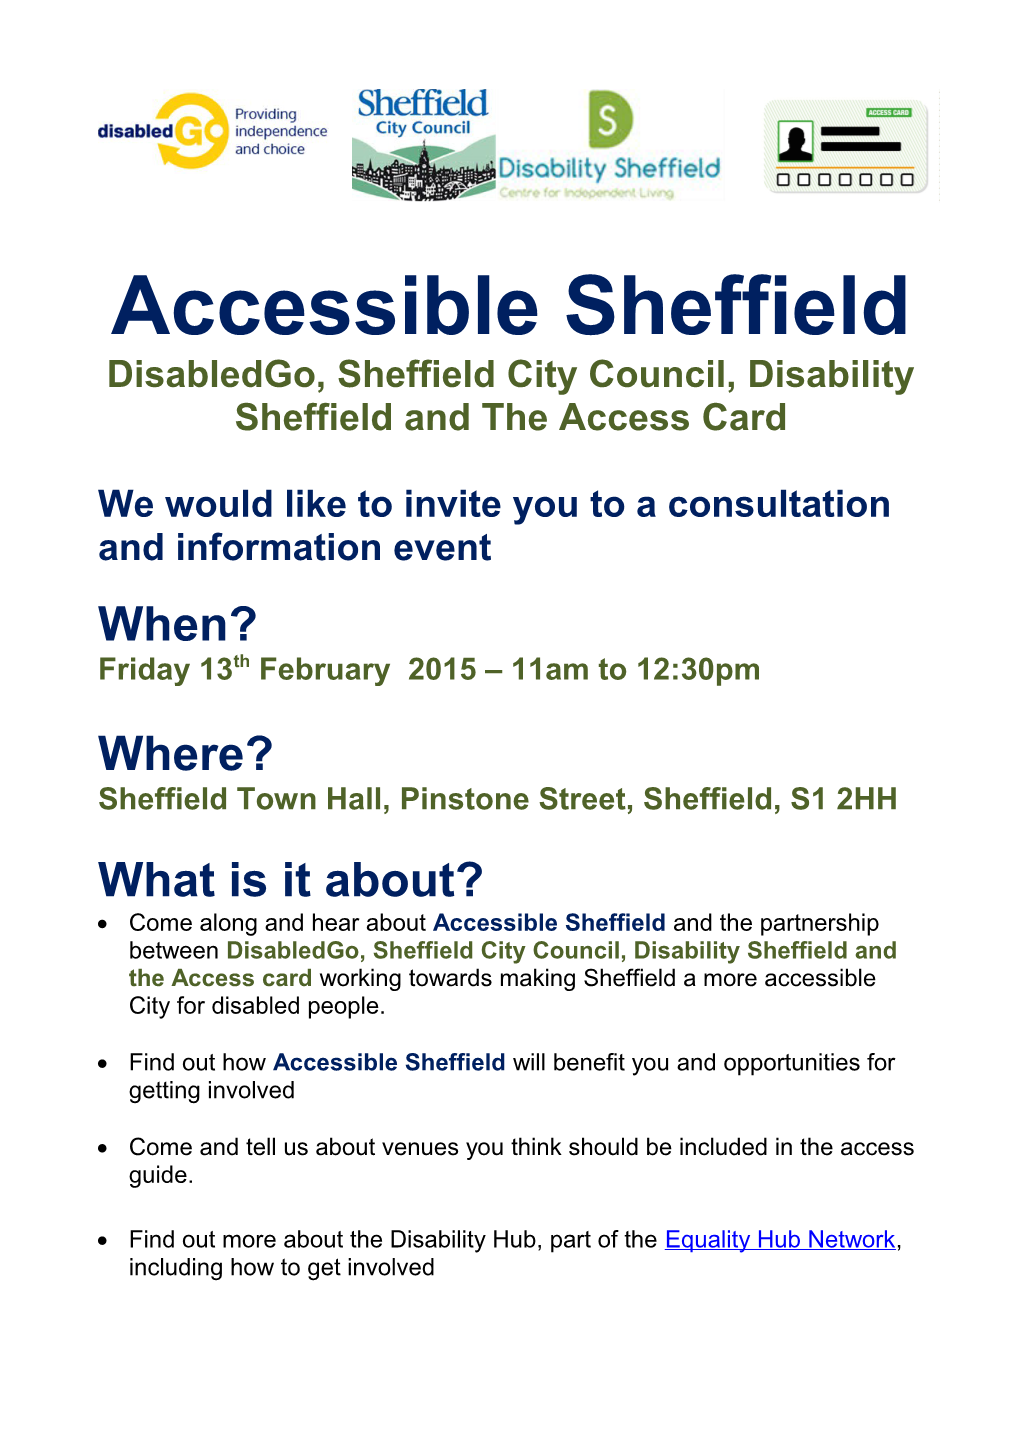 Disabledgo, Sheffield City Council, Disability Sheffield and the Access Card